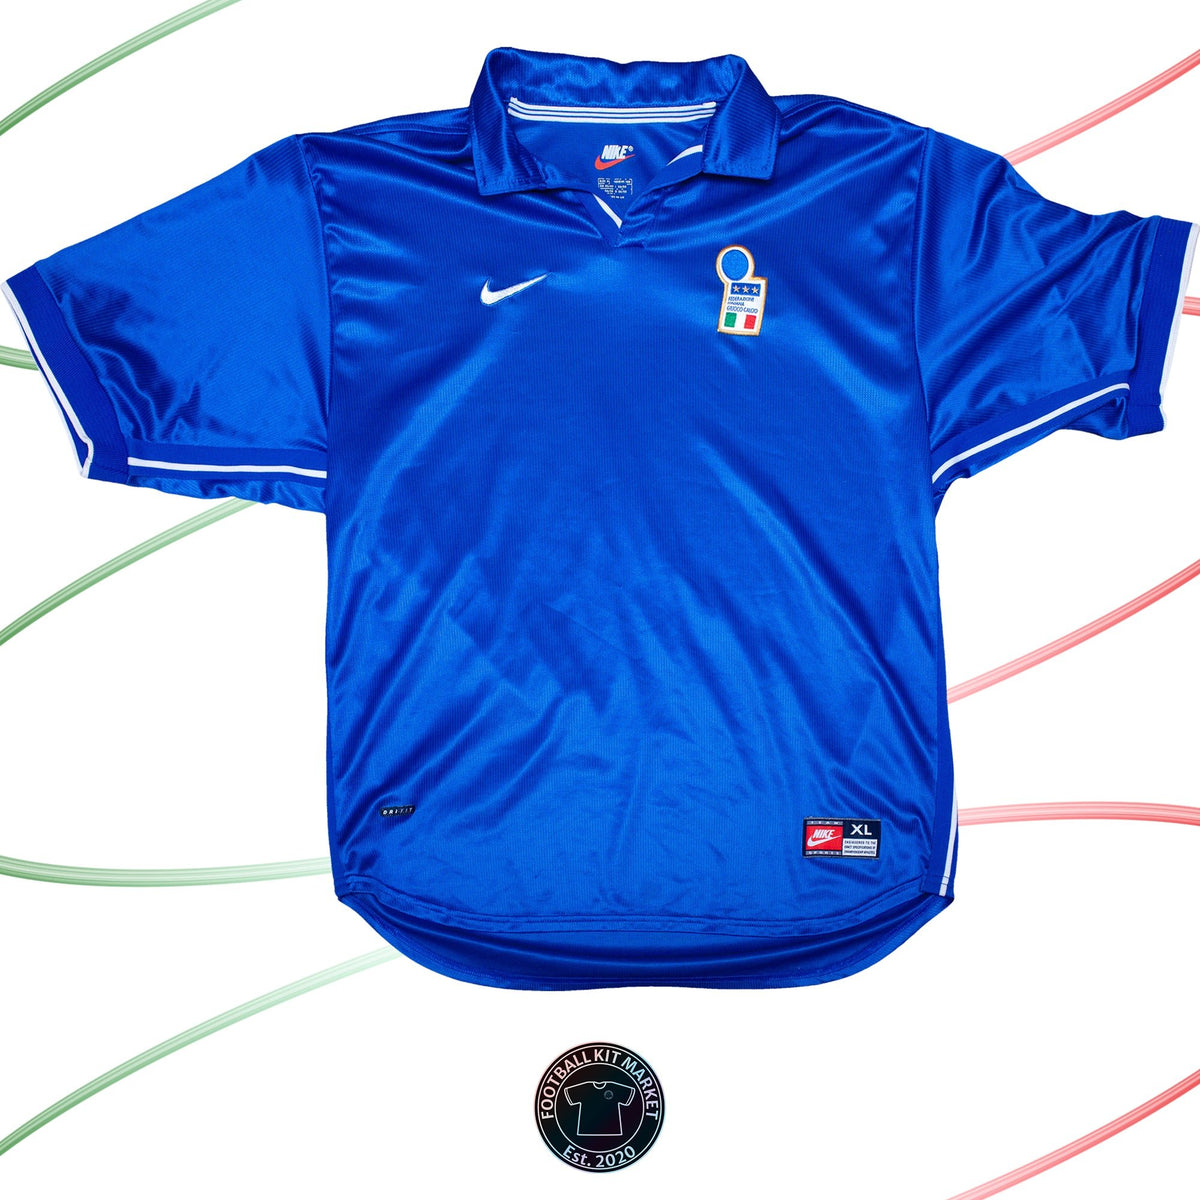 Genuine ITALY Home Shirt (1998) - NIKE (XL) - Product Image from Football Kit Market